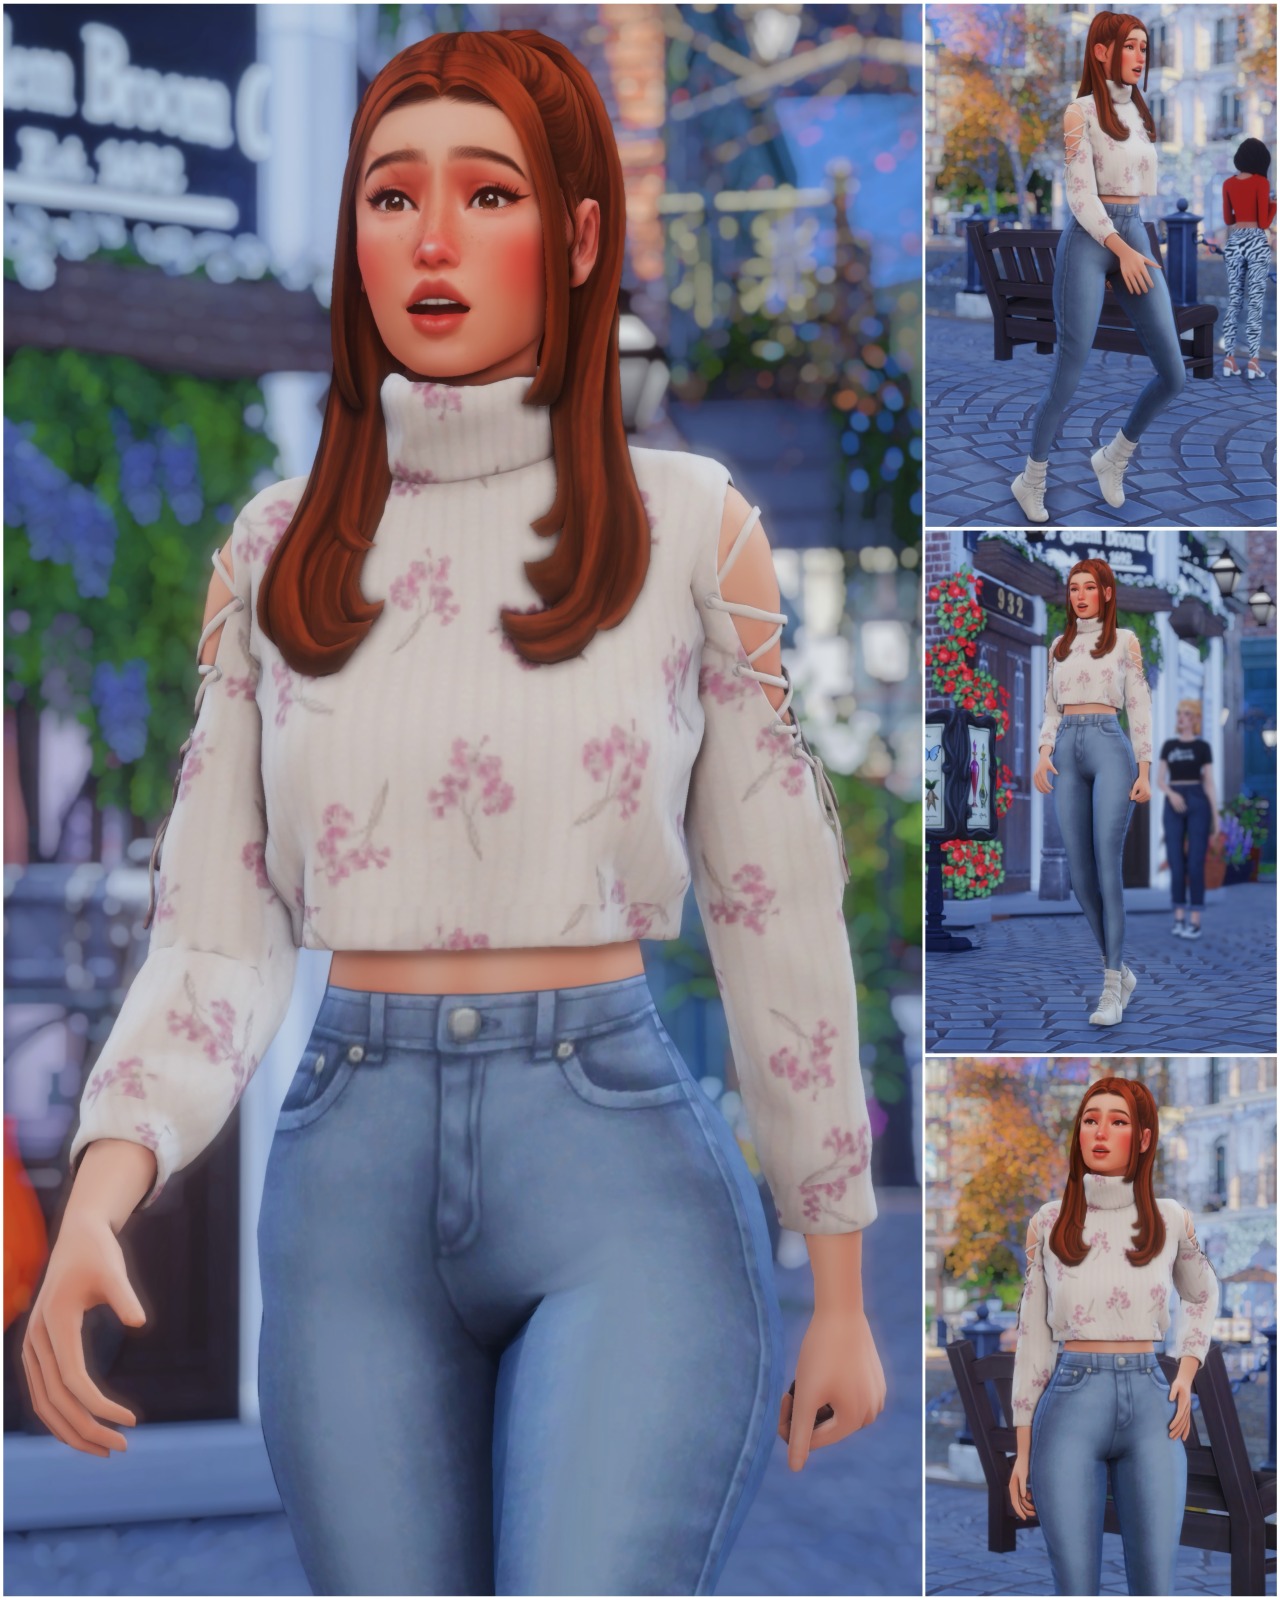 Whatasimmer - Female Walk Poses 2 - The Sims 4 Download - SimsFinds.com